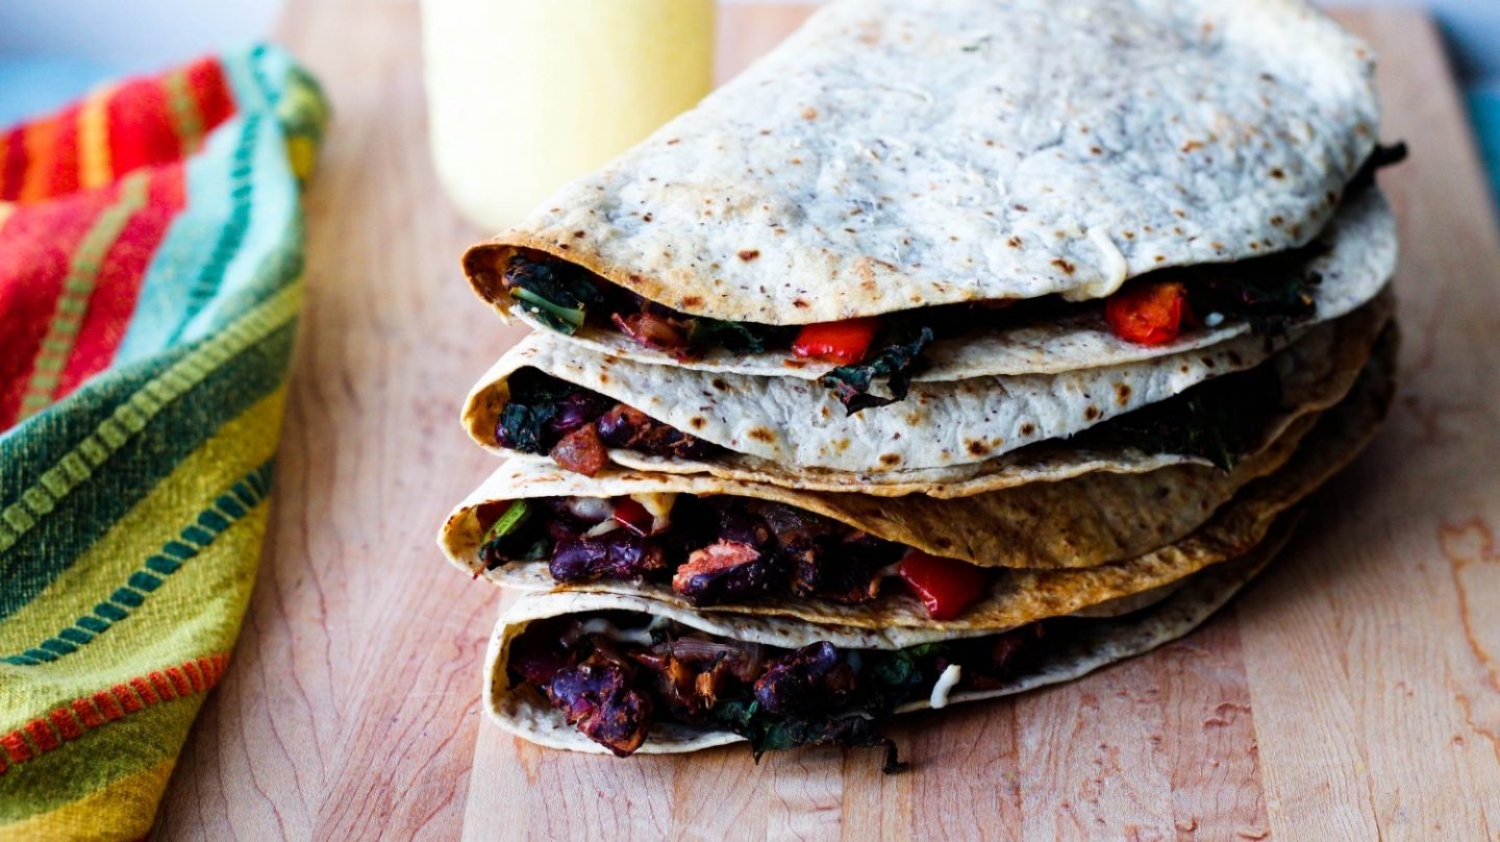 <p>For a delicious Caribbean & Tex-Mex mash-up, try these Caribbean-style kidney bean quesadillas with an irresistible 4-ingredient mango aioli you'll want to serve with everything. Cooked in the oven for easy bulk preparation, they'll easily become a family fave in your meatless dinner rotation. <a href="https://upbeetkitchen.com/2020/11/30/caribbean-kidney-bean-quesadillas-with-mango-aioli/" rel="noopener">Get the recipe here.</a></p>